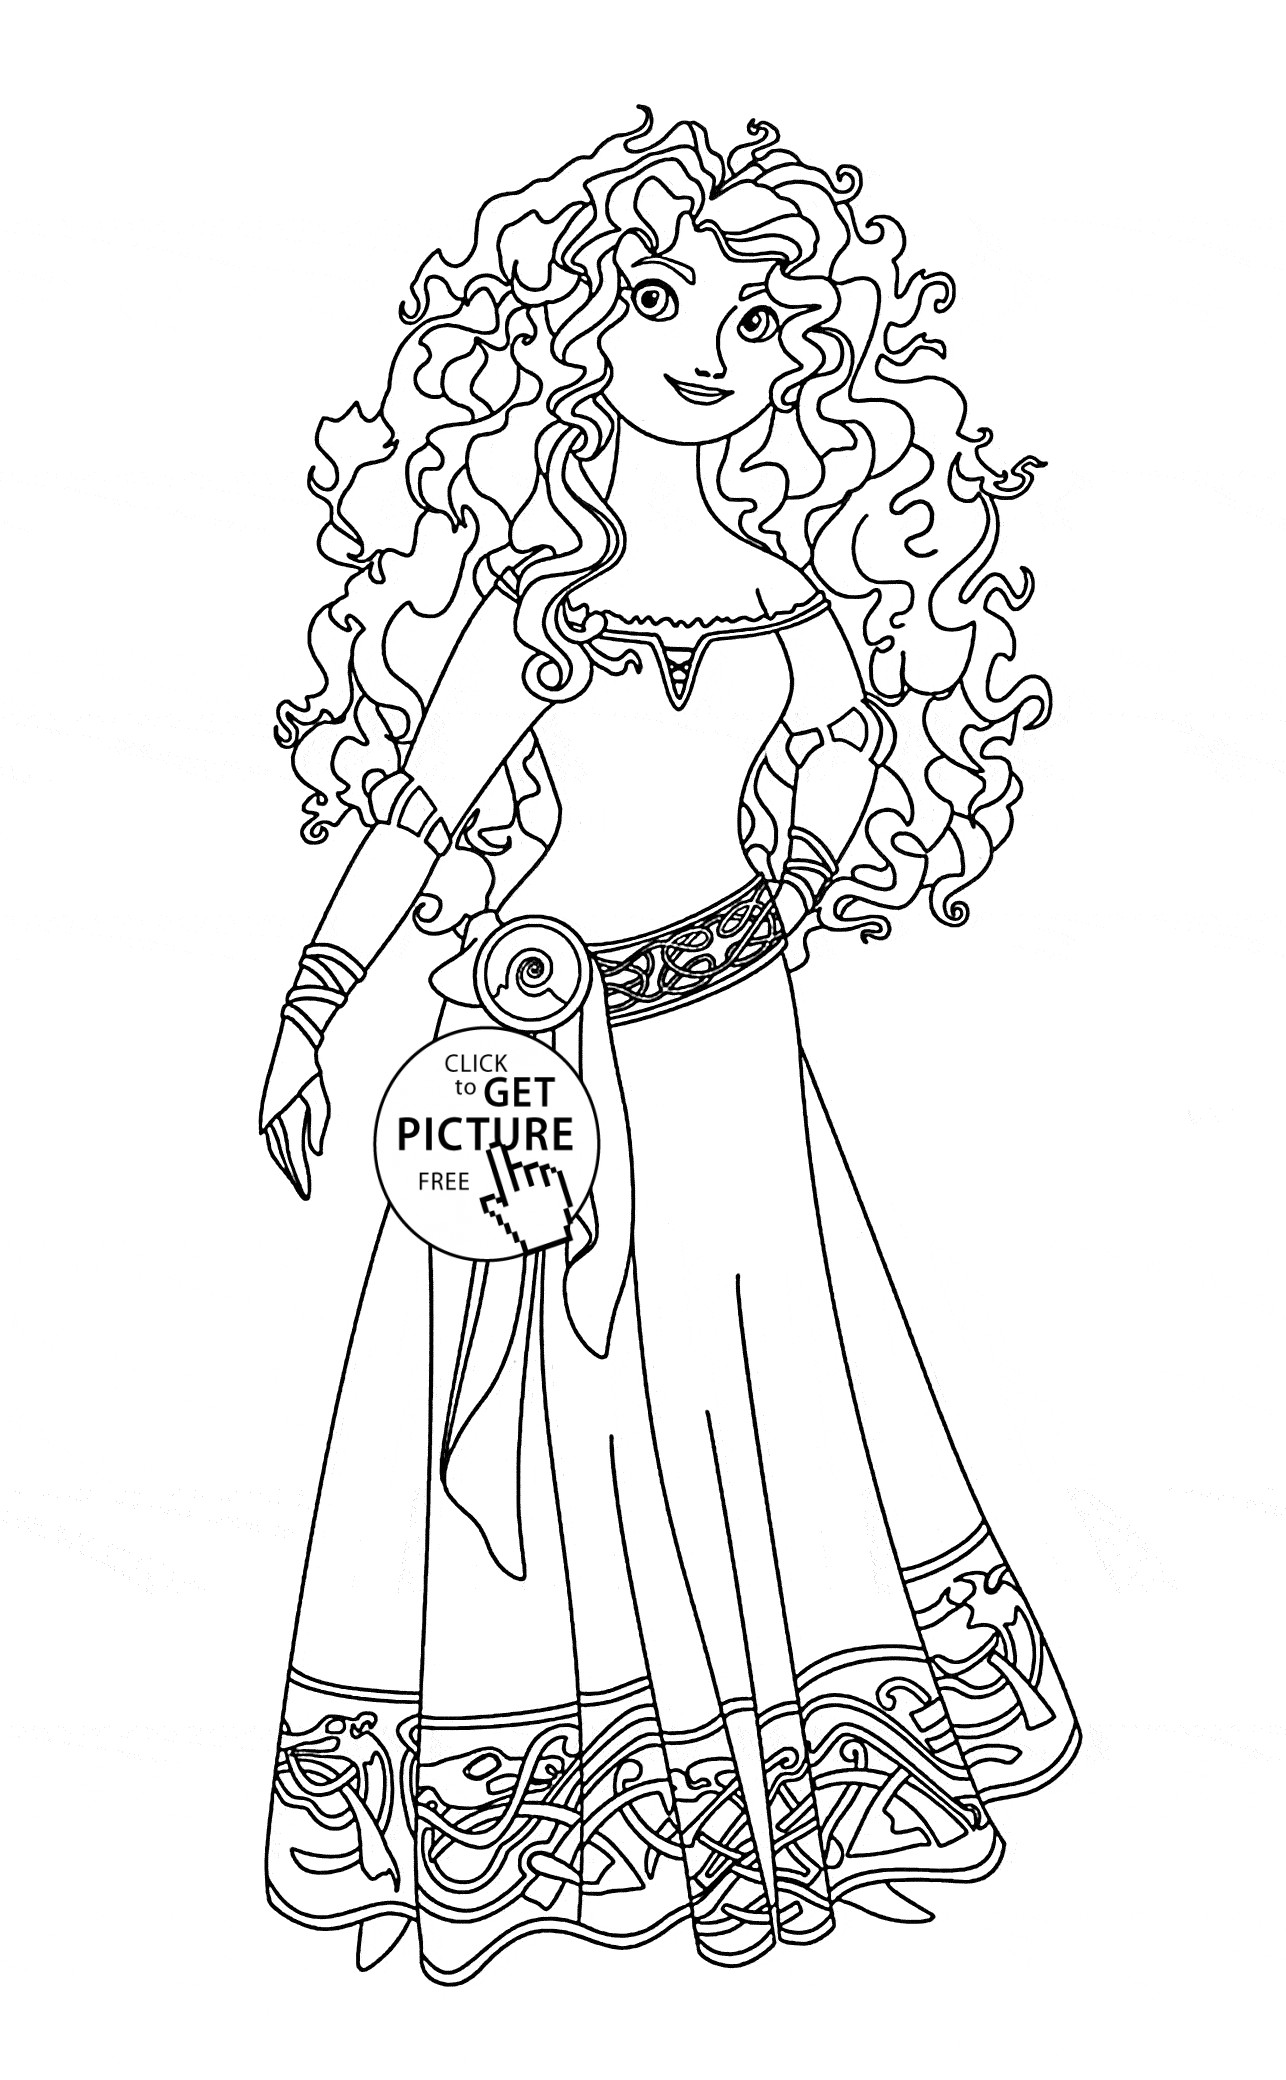 Coloring Pages For Girls Mouted Princess
 Brave Merida coloring page for kids disney princess